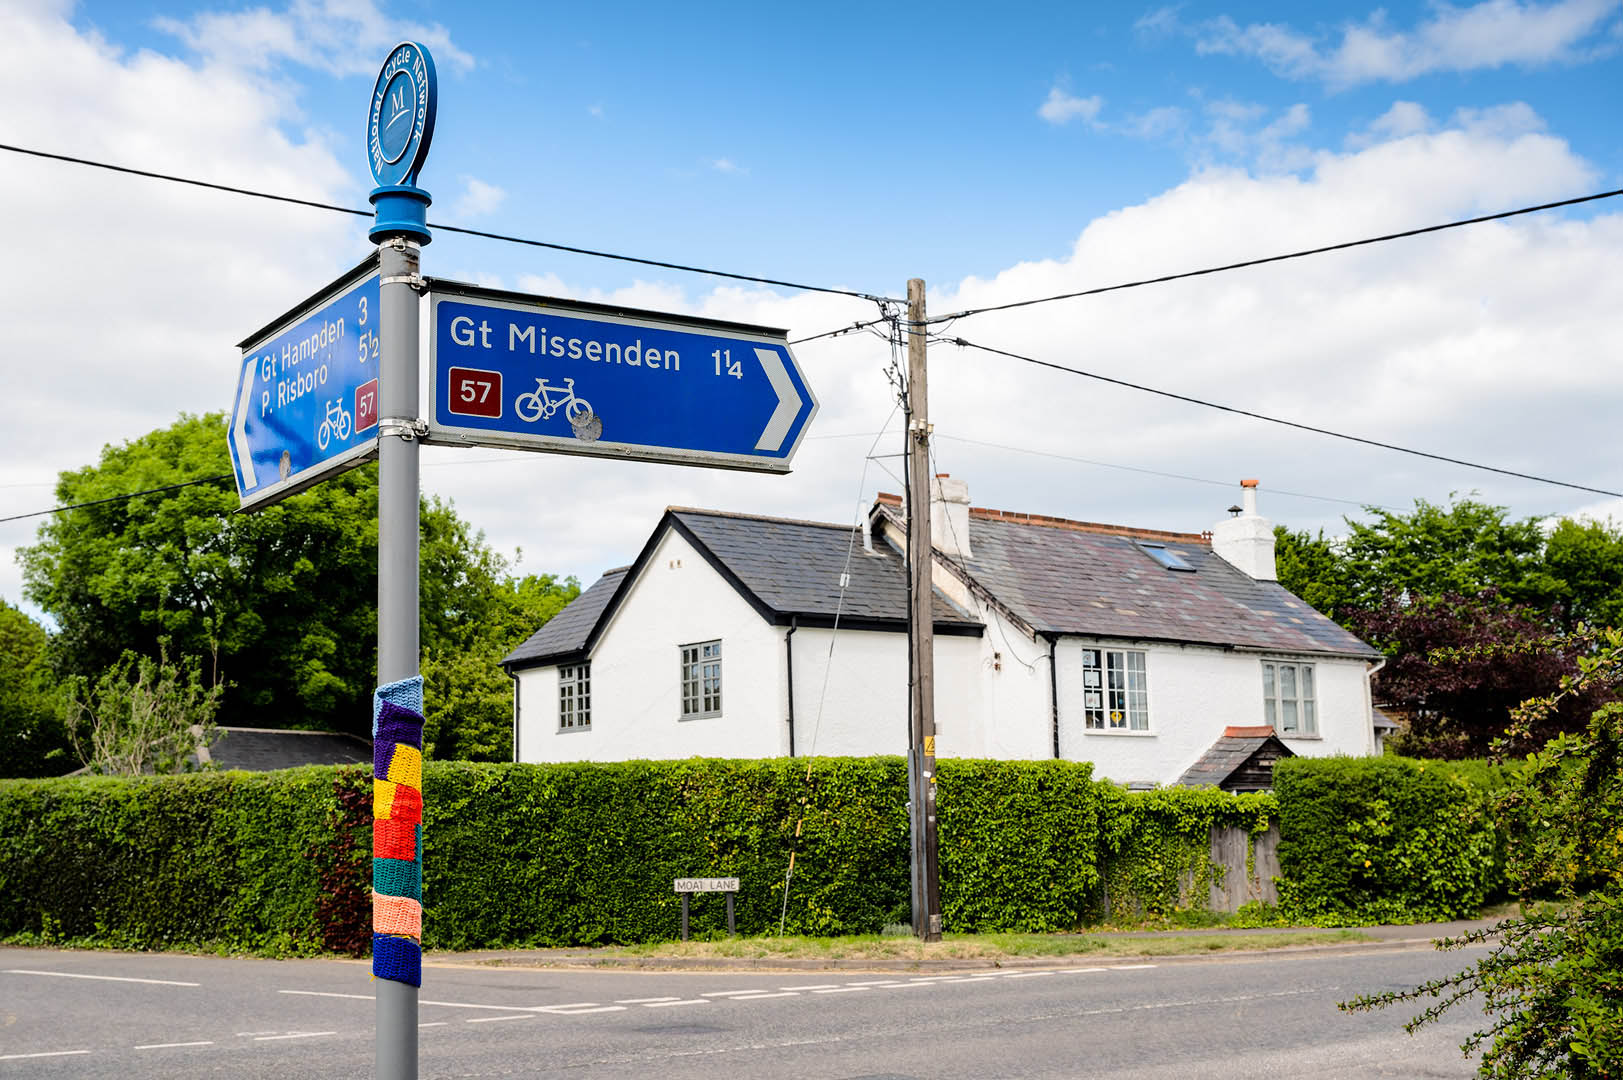 Cycle route signage adorned with rainbow scarf during lockdown